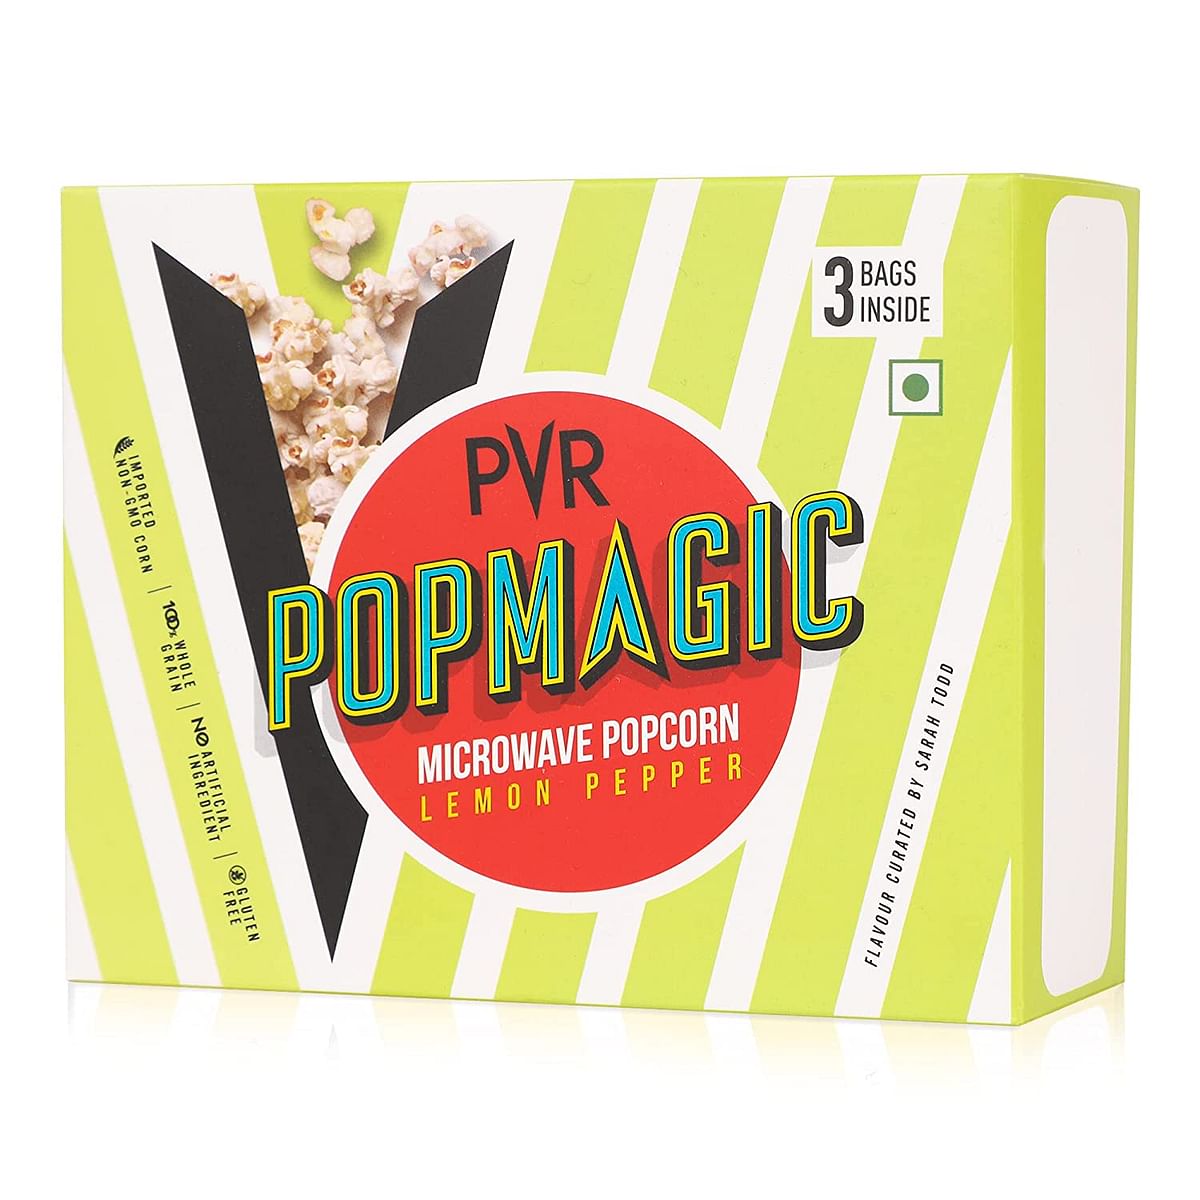 “Pushed ourselves to stay relevant”: PVR’s Gautam Dutta on
FMCG outing with microwavable popcorn